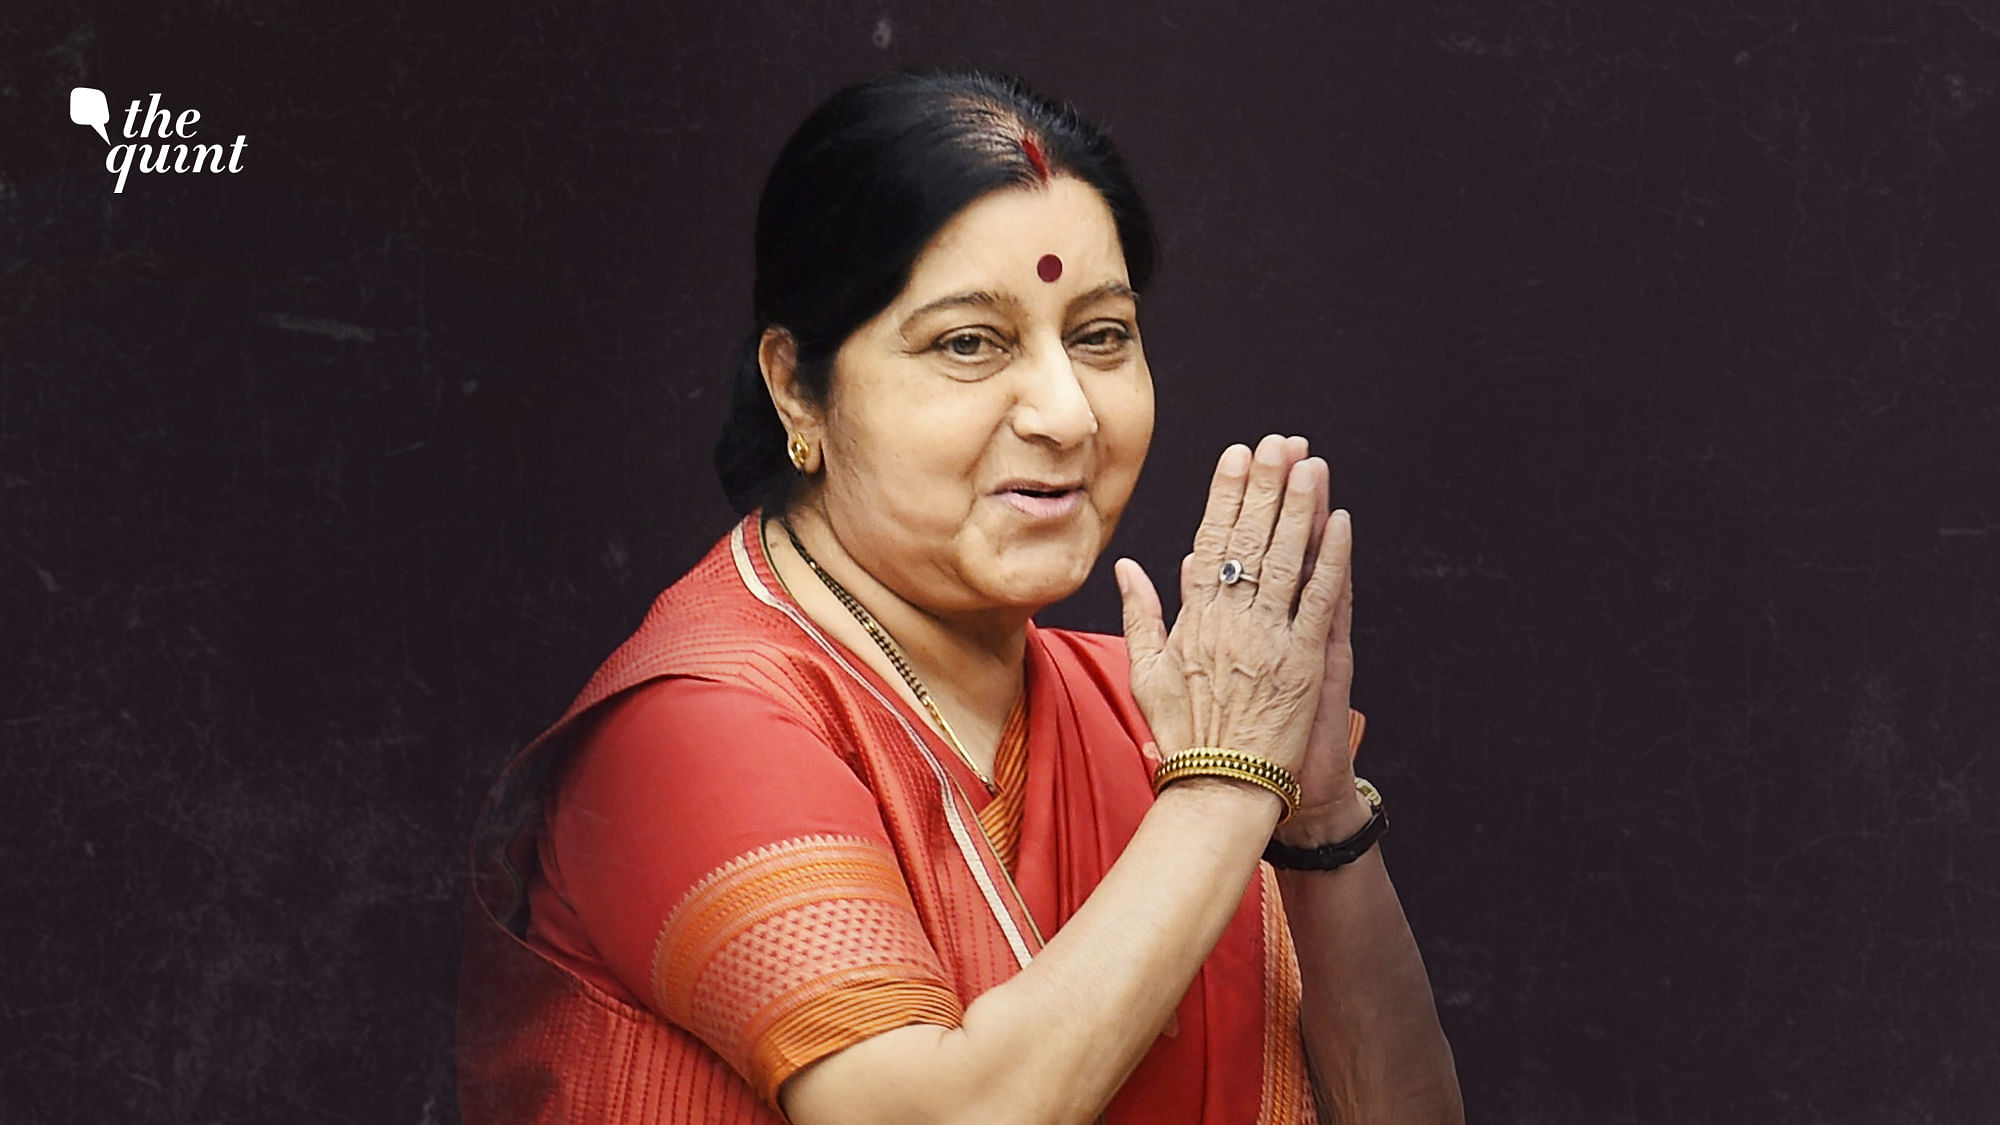 Sushma swaraj was a powerful orator who knew how to make bold speeches yet win hearts across party lines.